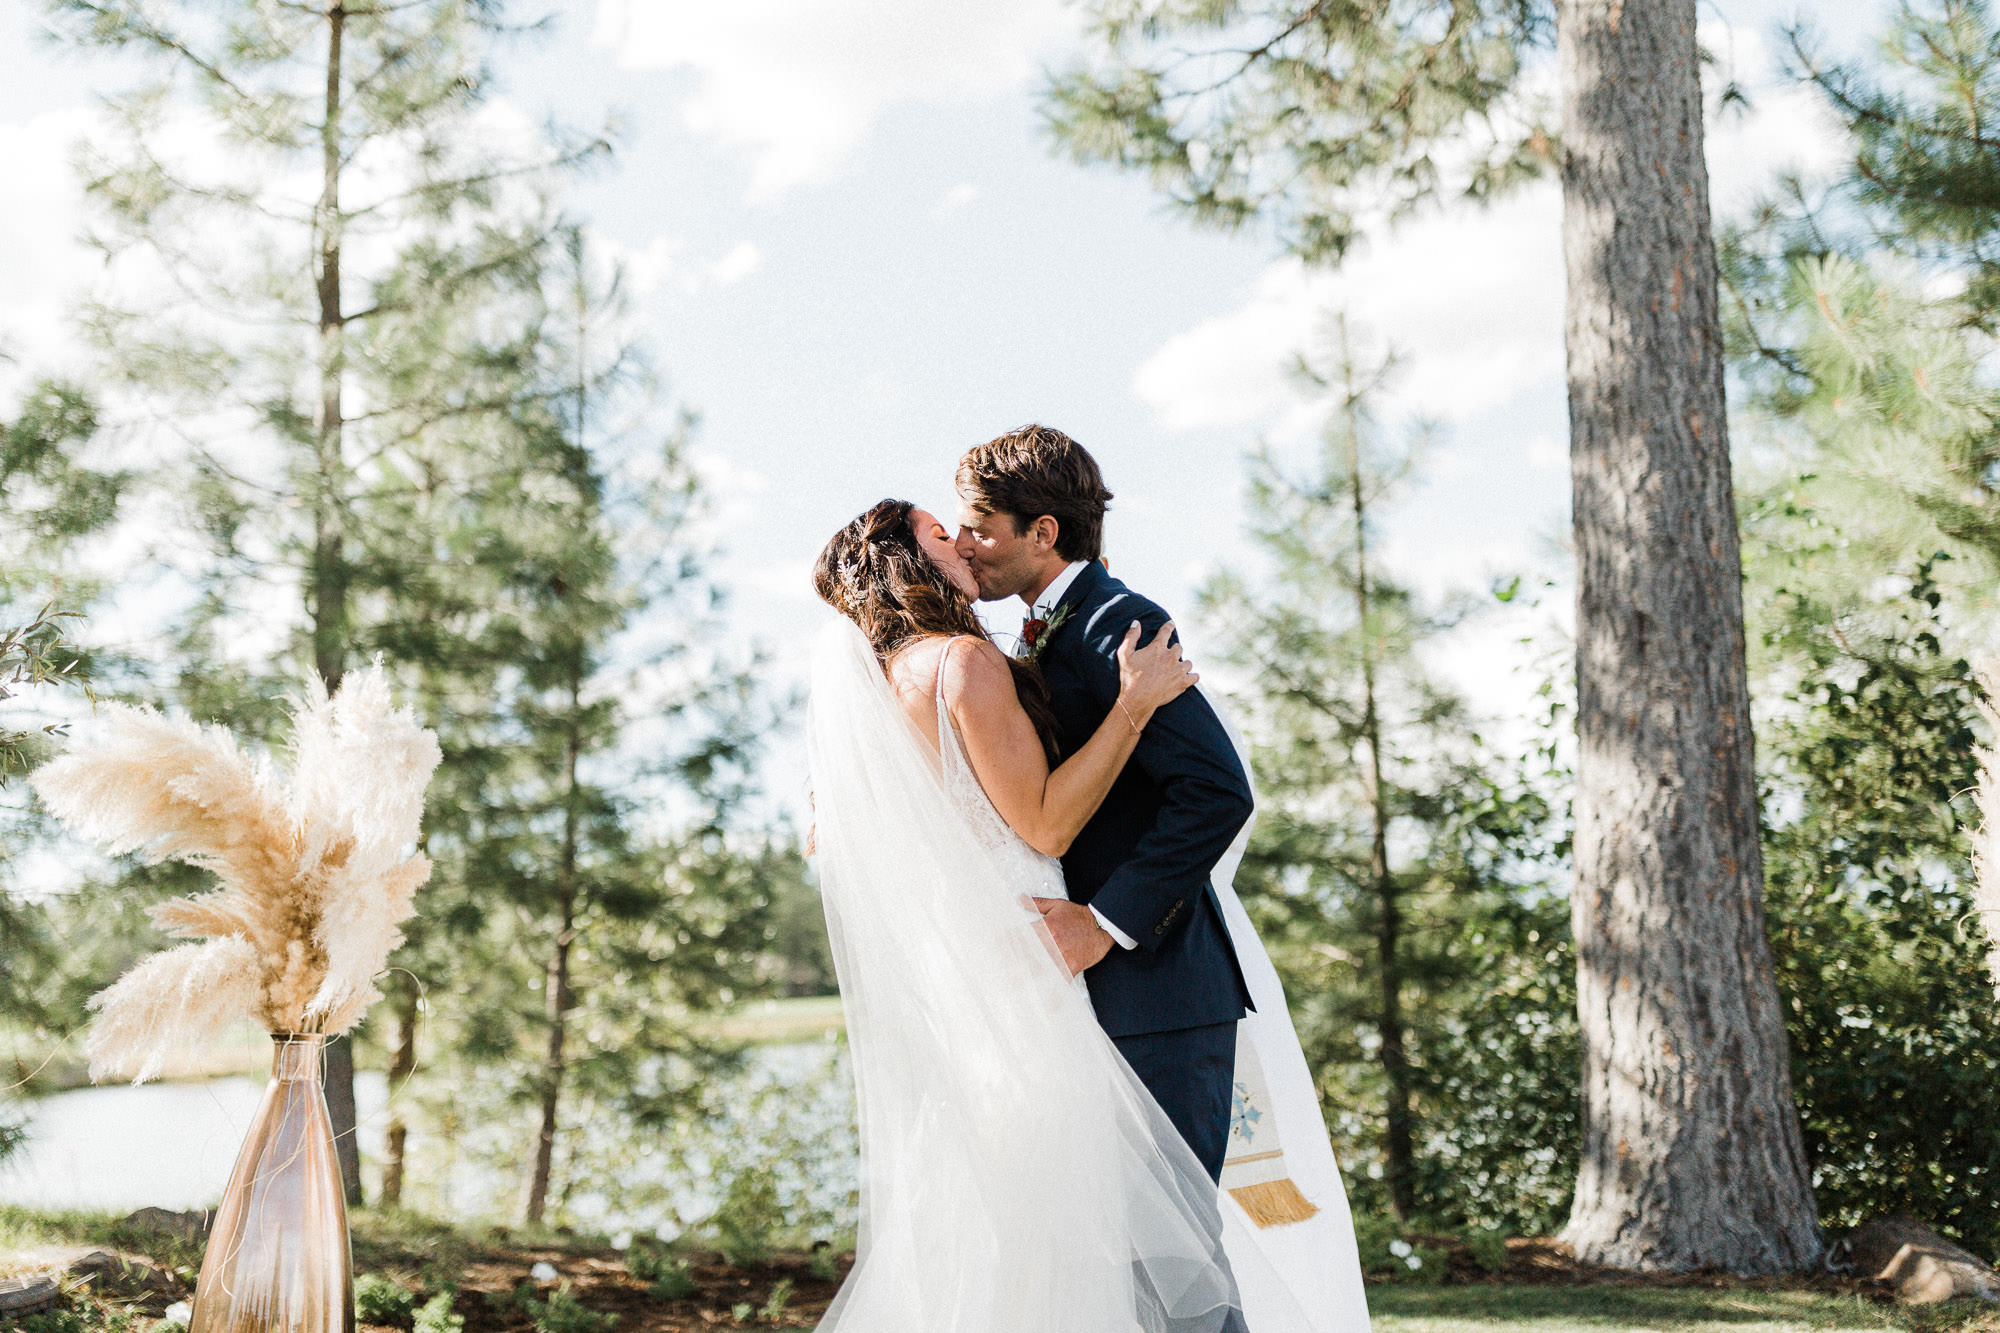 Bride and groom share first kiss at wedding at Broken Top Club in Bend, Oregon